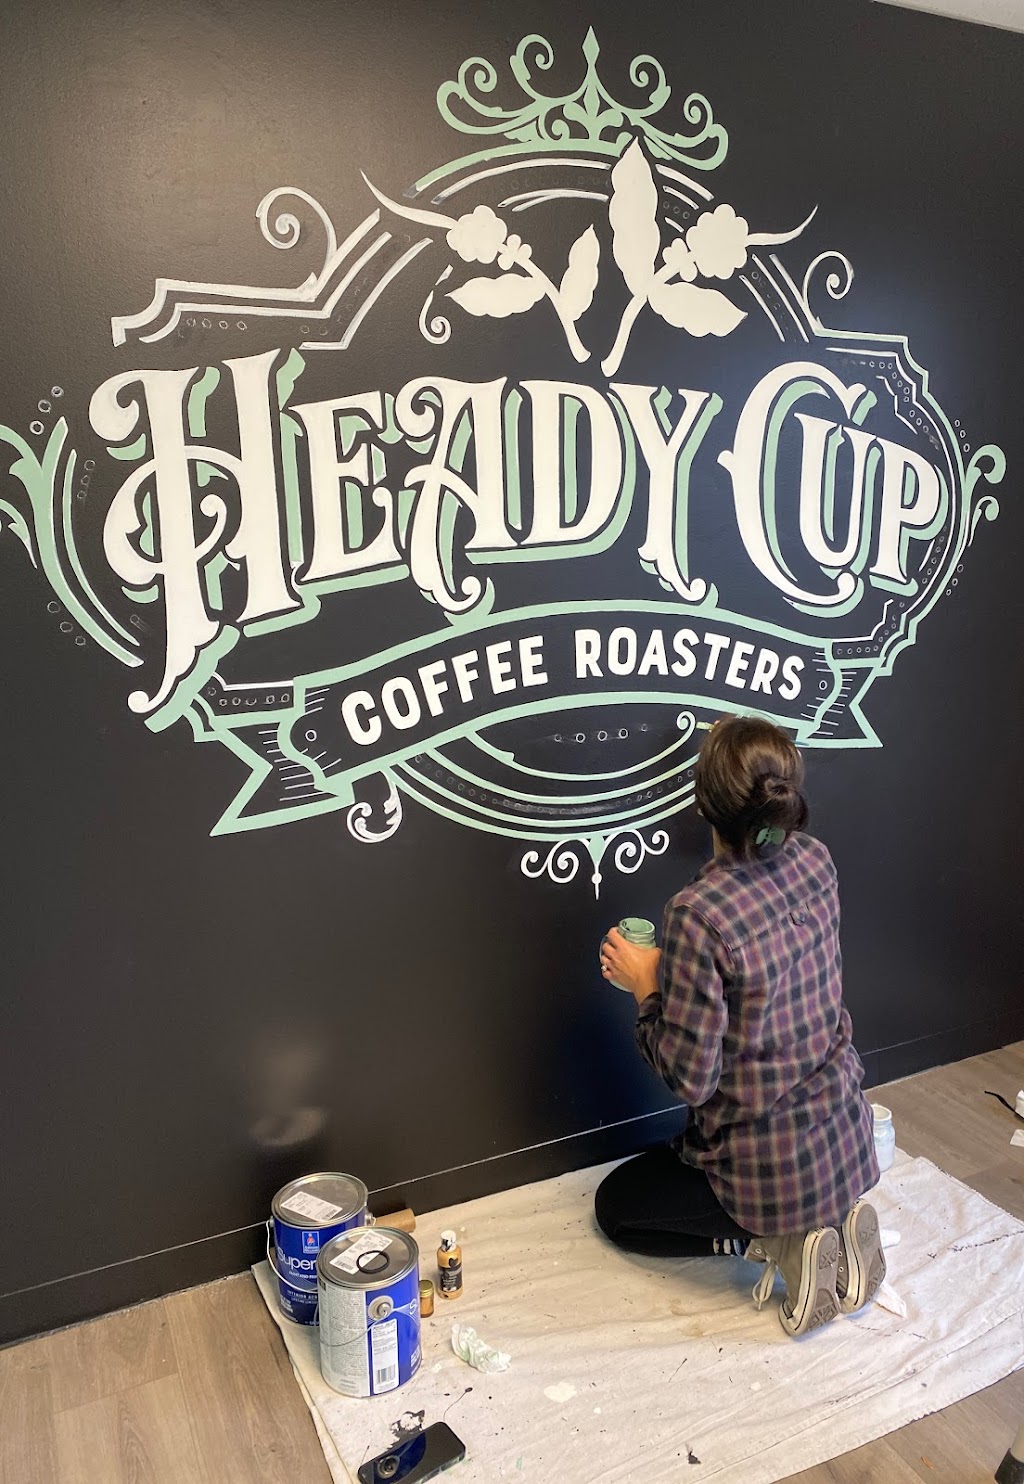 Heady Cup Coffee Roasters | 4127 W Orleans St, McHenry, IL 60050 | Phone: (815) 322-2015